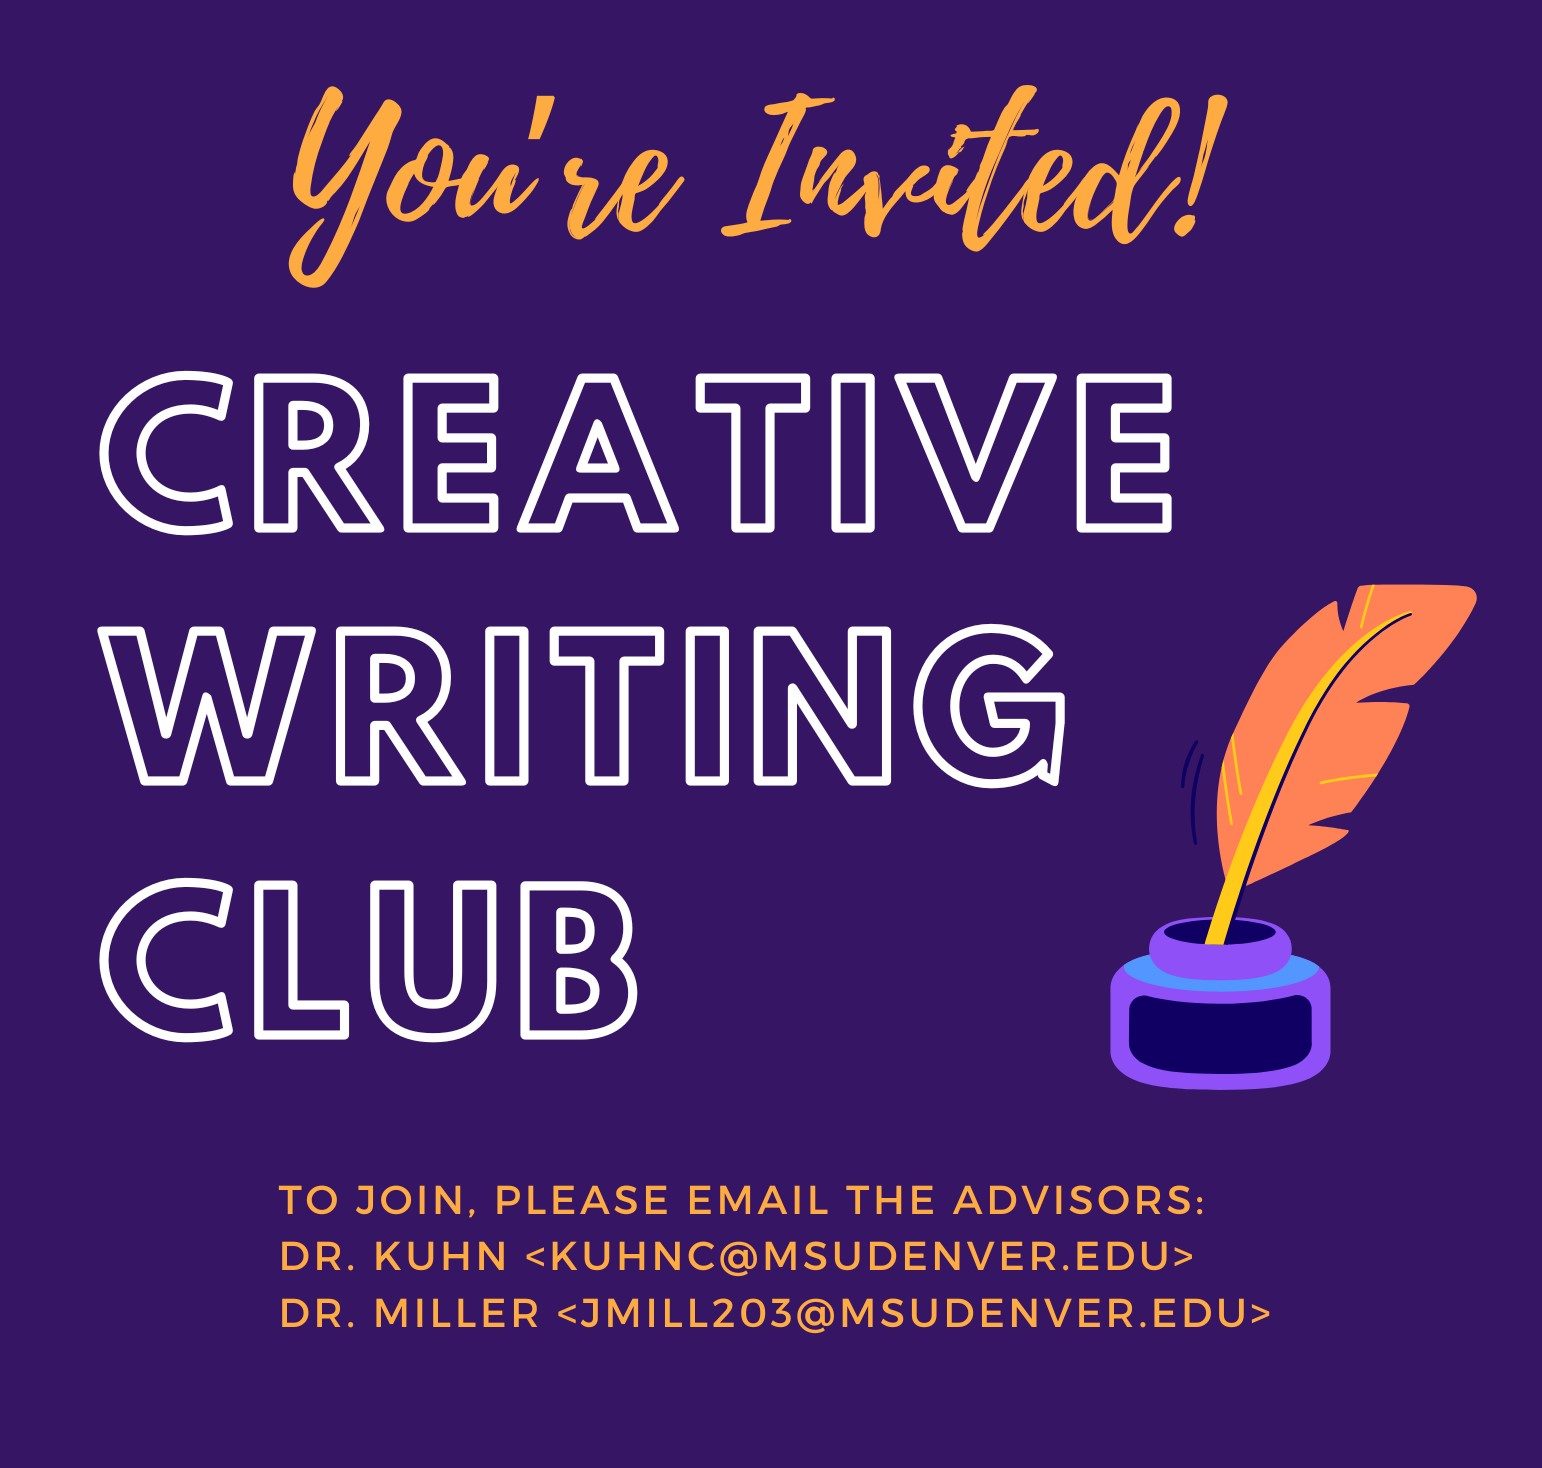 You're invited to join the creative writing club. To join, please email the advisors: Dr. Kuhn or Dr. Miller